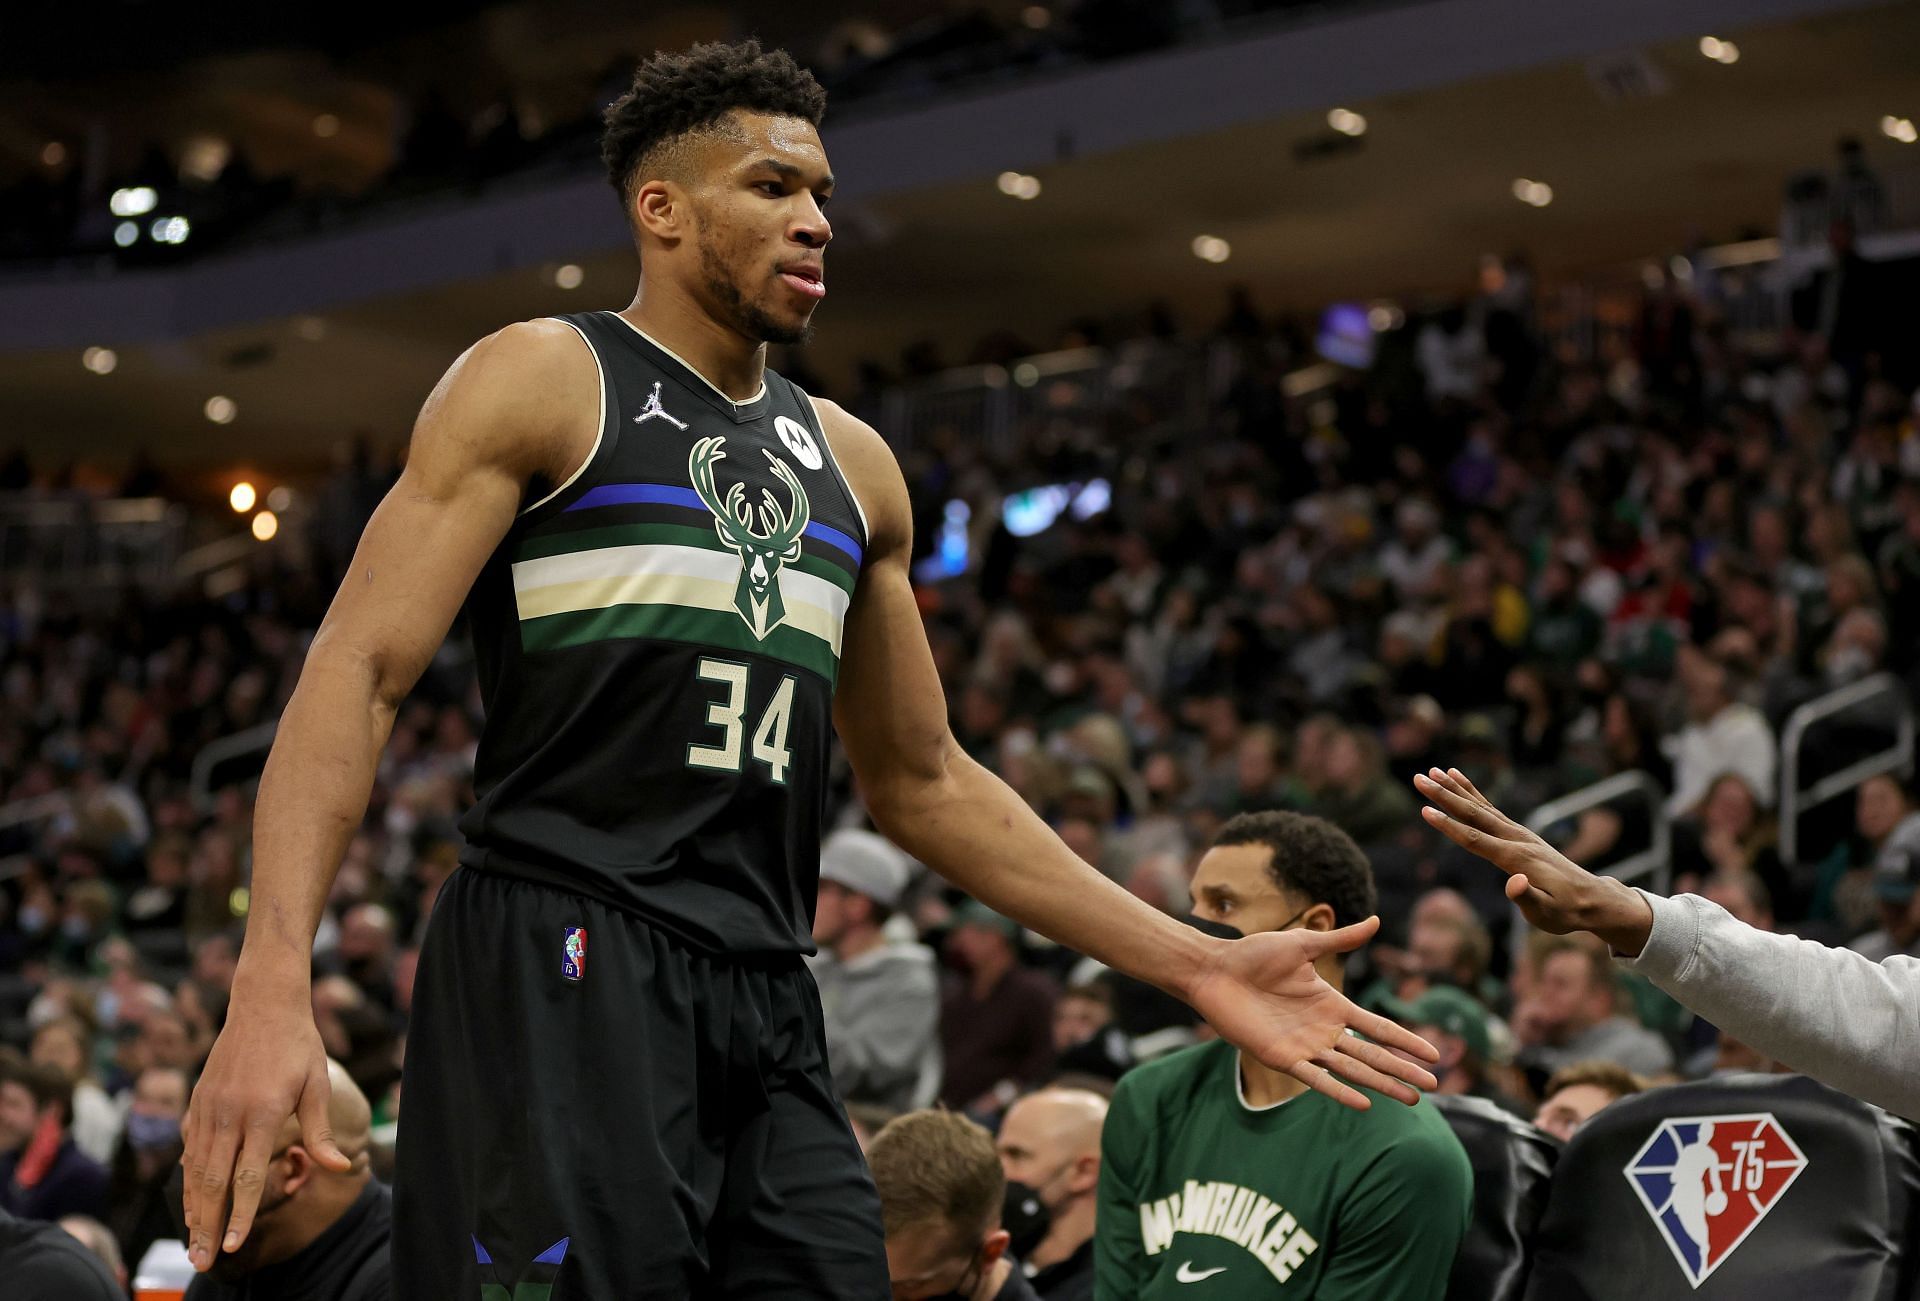 Giannis Antetokounmpo #34 of the Milwaukee Bucks walks to the bench during the fourth quarter against the New York Knicks at Fiserv Forum on January 28, 2022 in Milwaukee, Wisconsin.